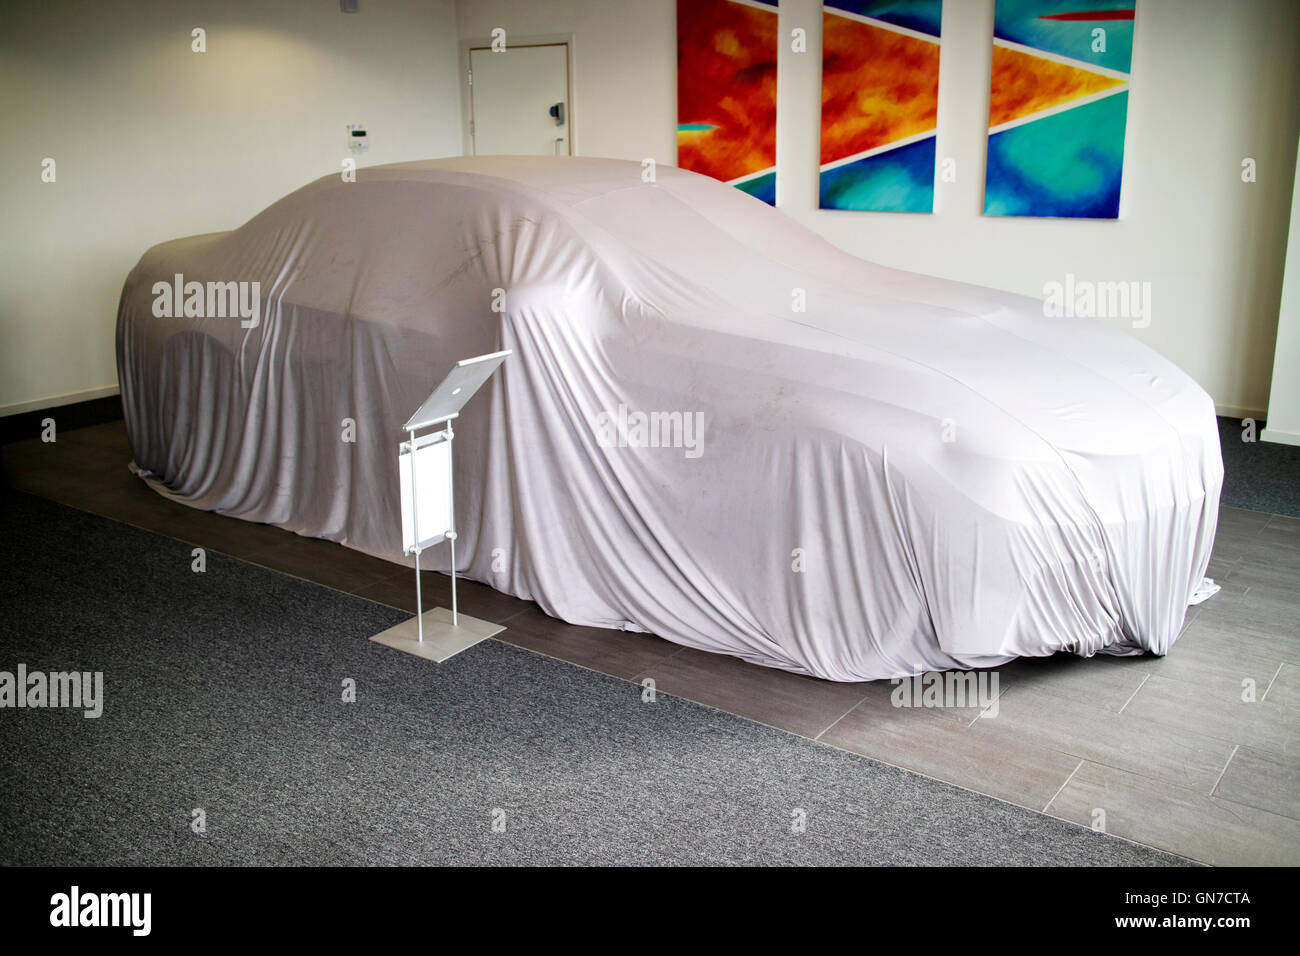 Brand new 2016 F83 BMW M4 convertible 2 door coupe under cover at Williams Rochdale BMW showroom awaiting very excited customer Stock Photo